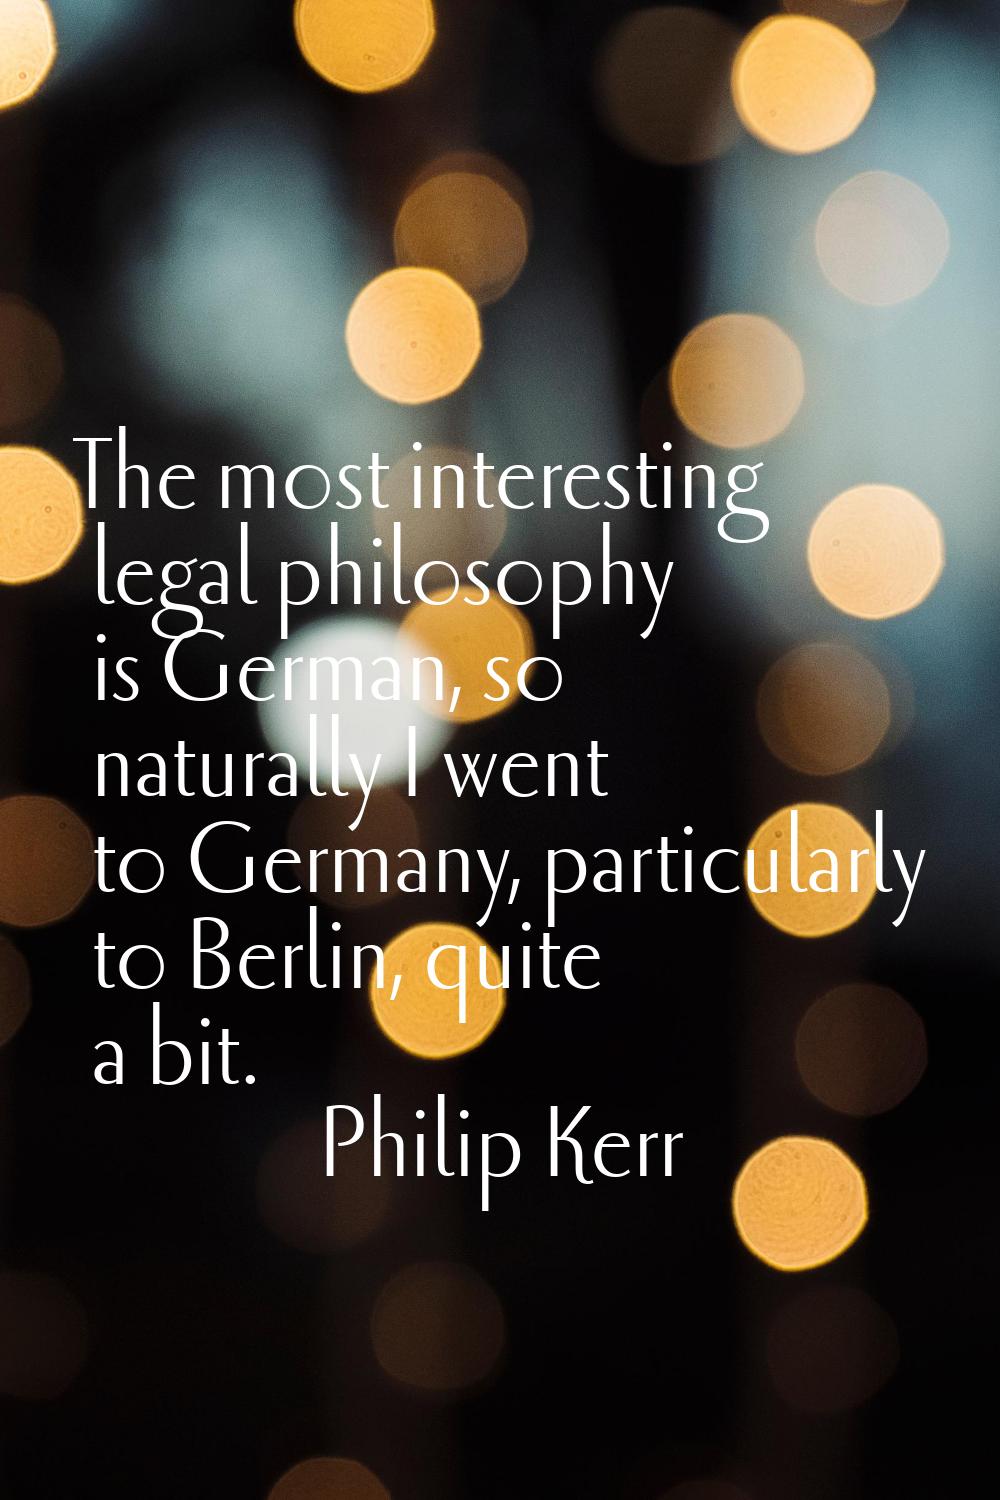 The most interesting legal philosophy is German, so naturally I went to Germany, particularly to Be